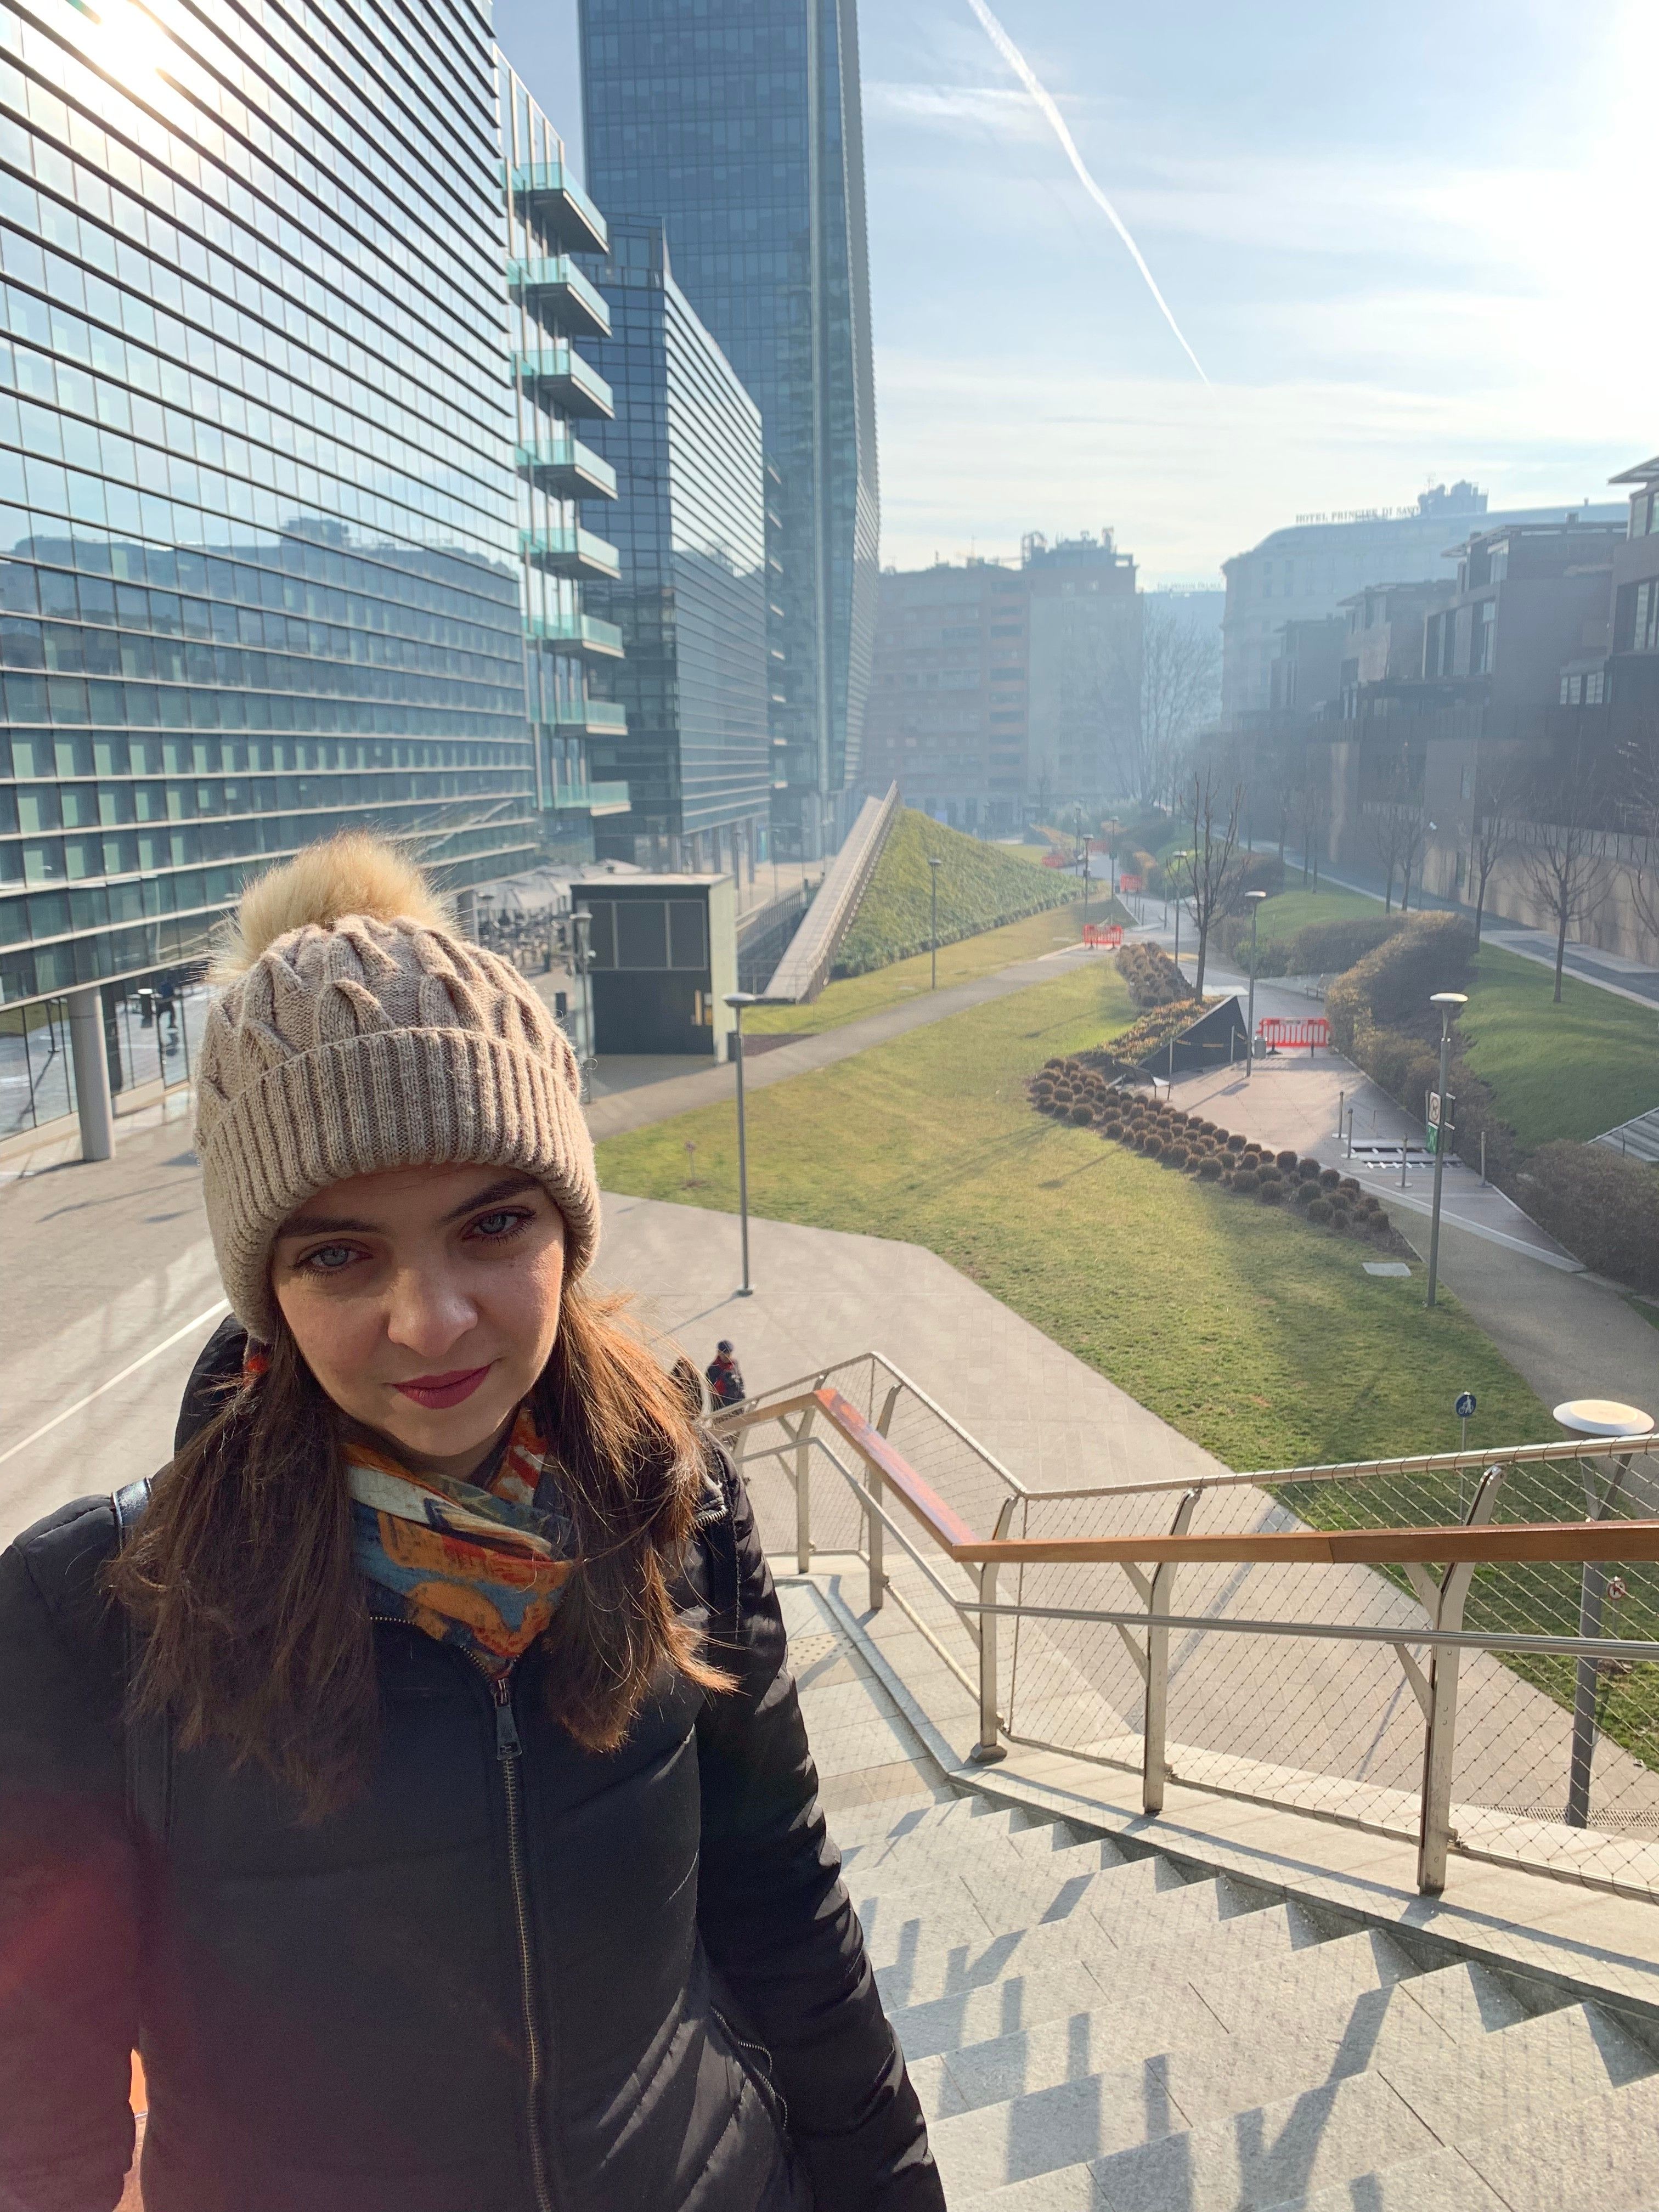 Caption: A photo of me with a business buildings, stairs and a grassy valley behind. Milan, Italy (Local Guide MashaPS)